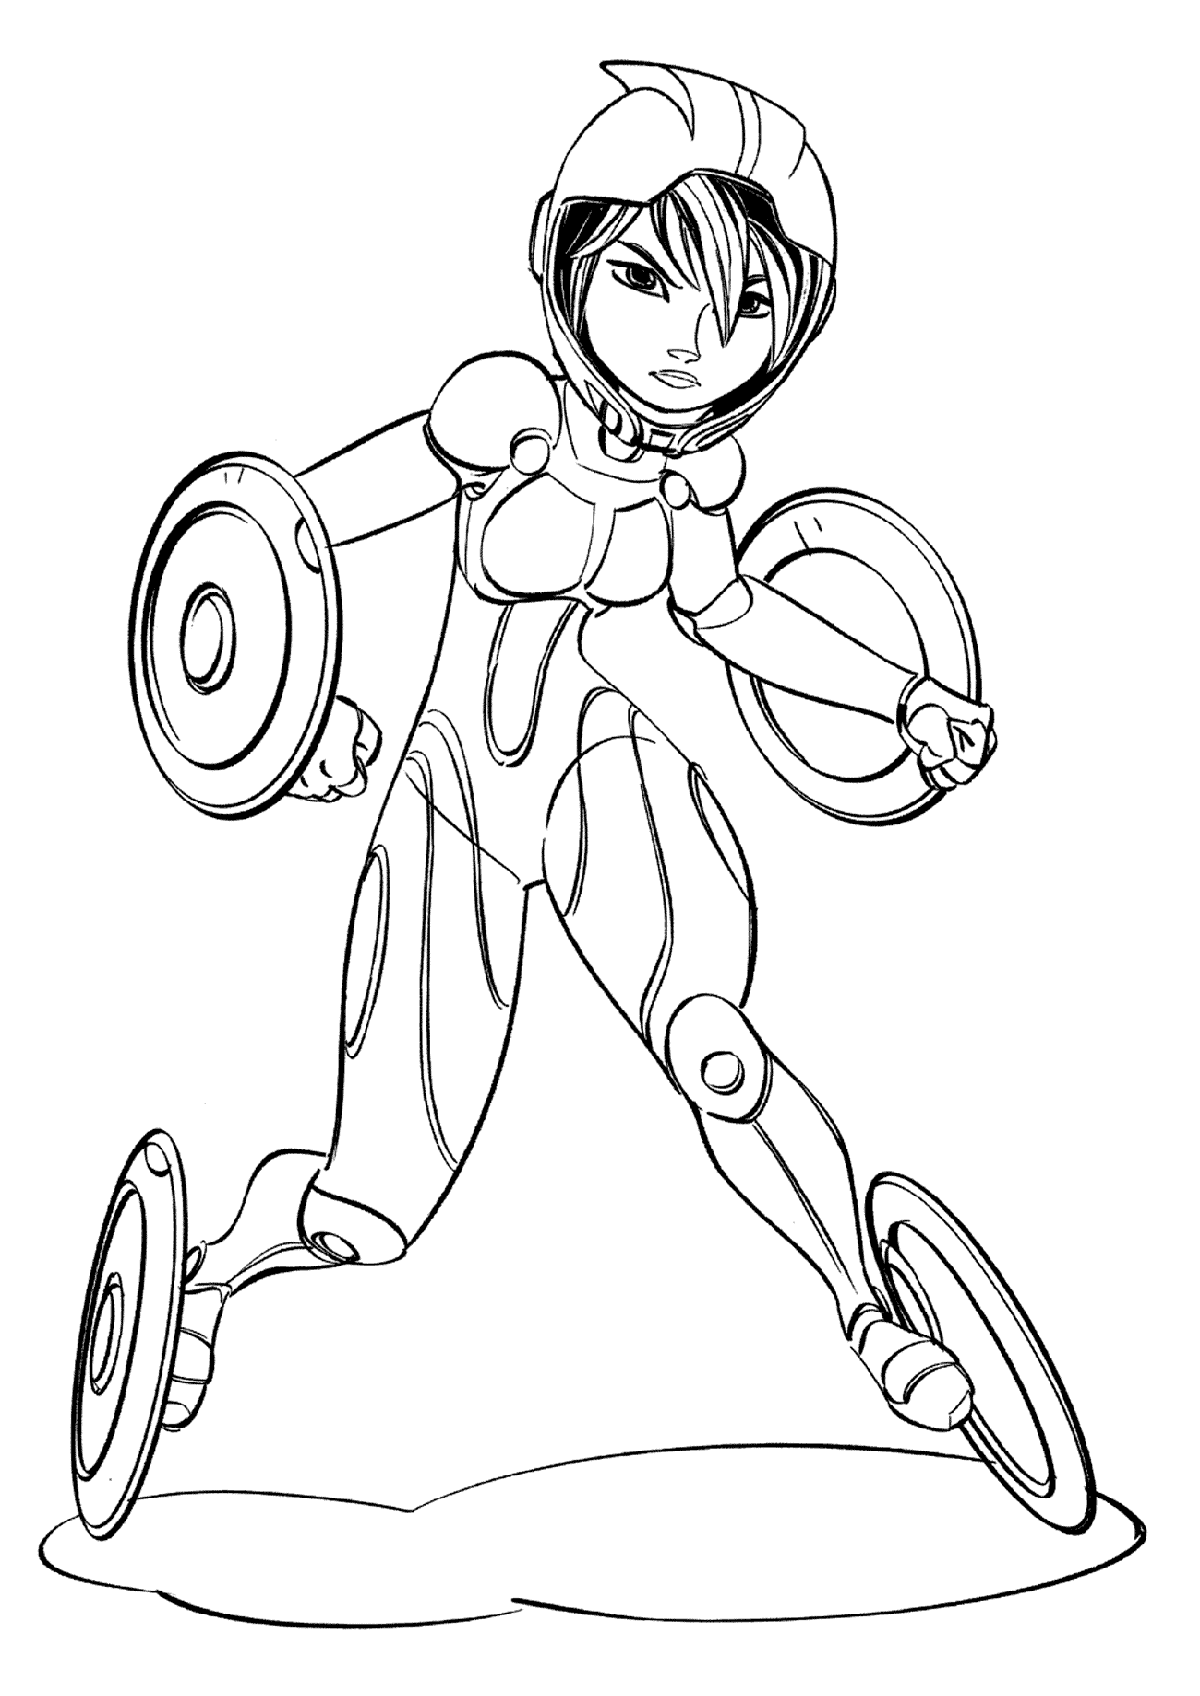 big hero 6 free colouring pages big hero 6 coloring pages to download and print for free free big hero colouring pages 6 